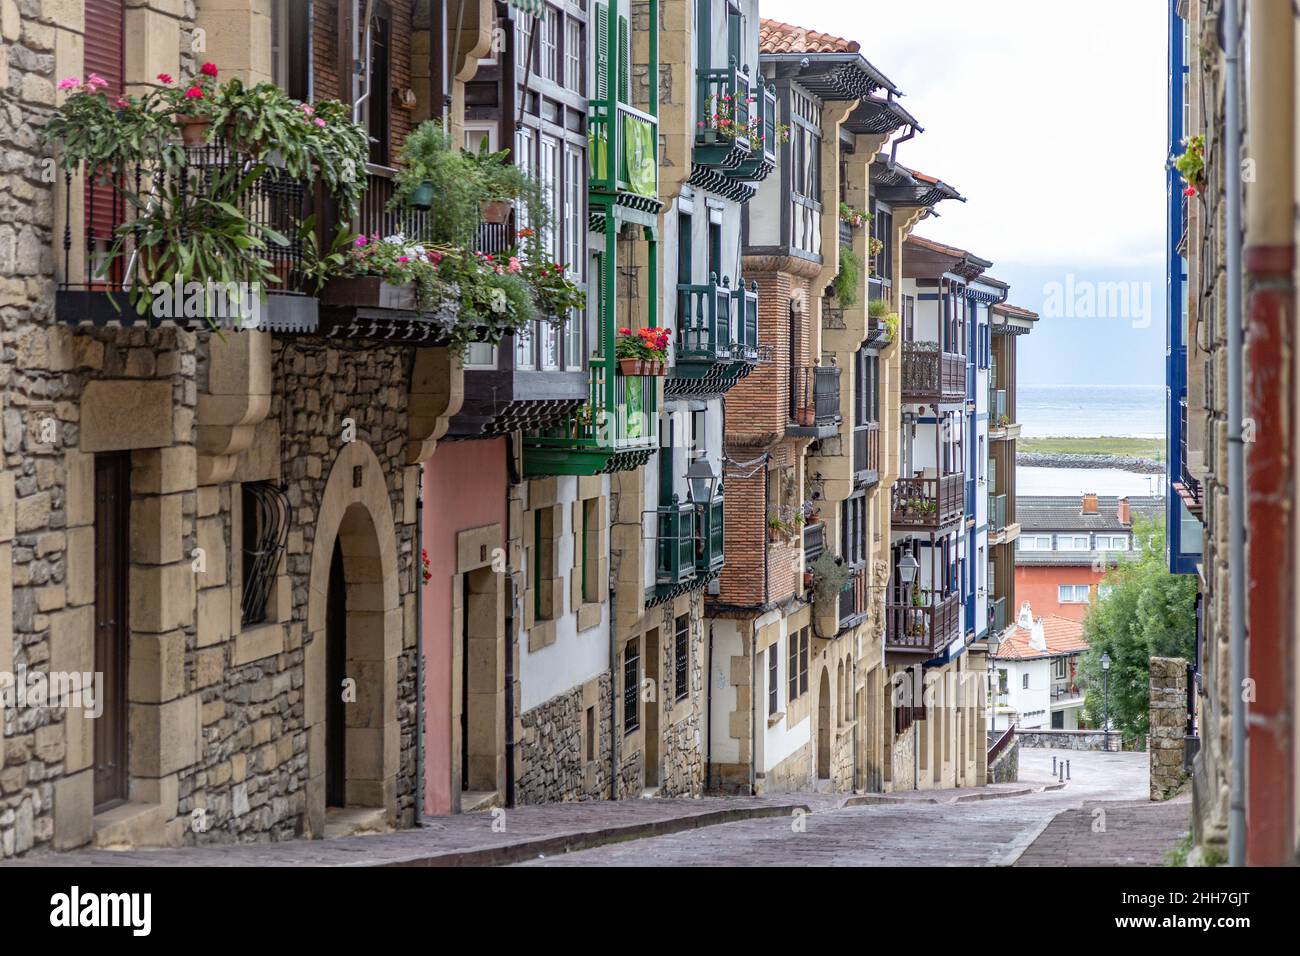 Architecture of the streets of the Hondarribia, Spain Stock Photo